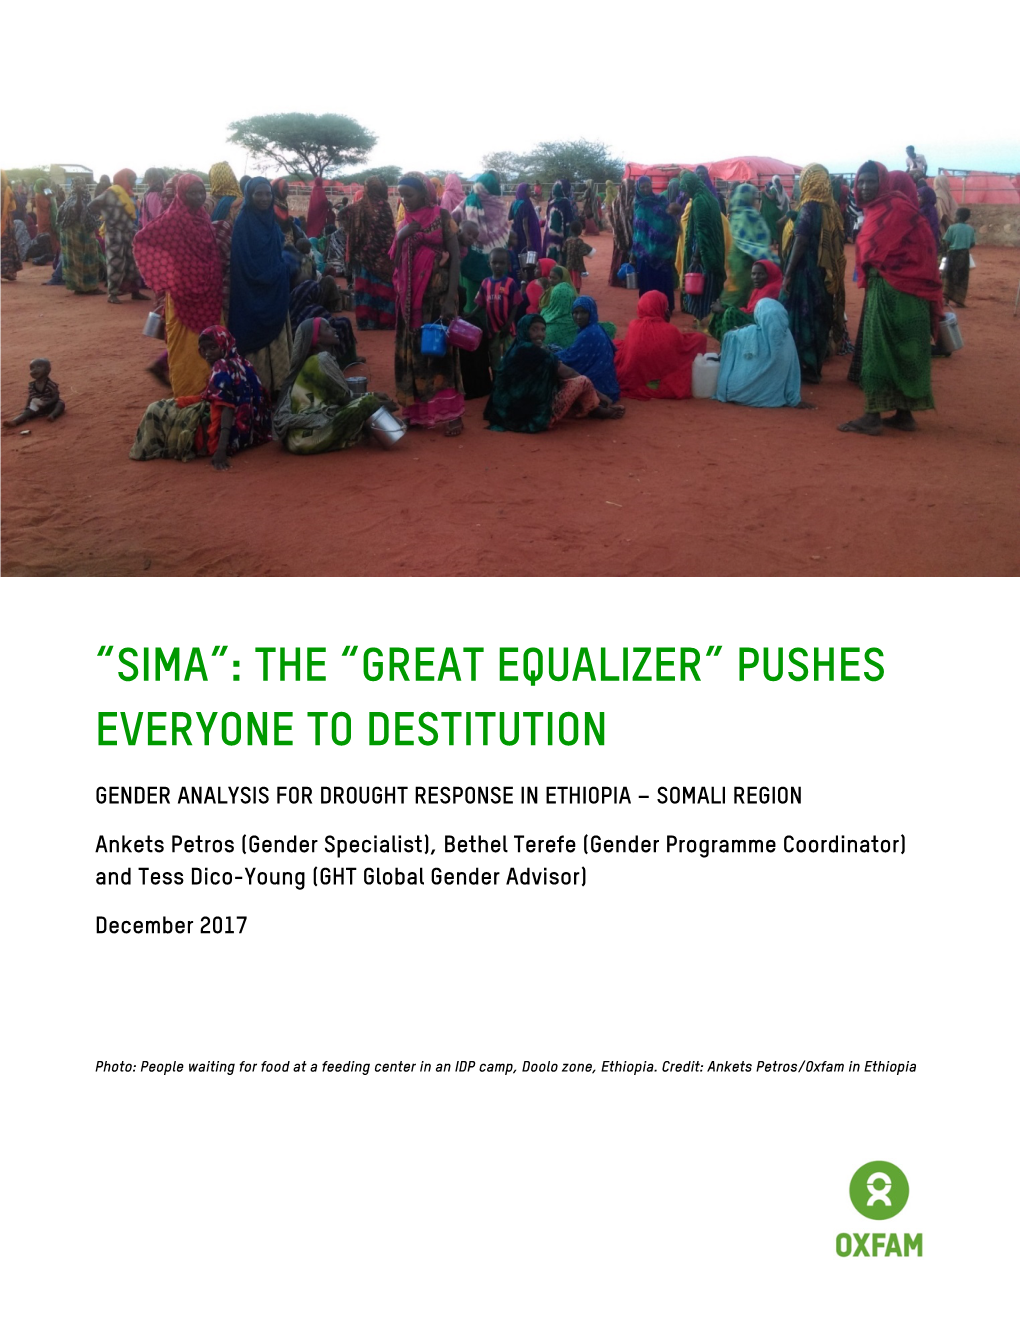 "Sima: the "Great Equalizer" Pushes Everyone to Destitution